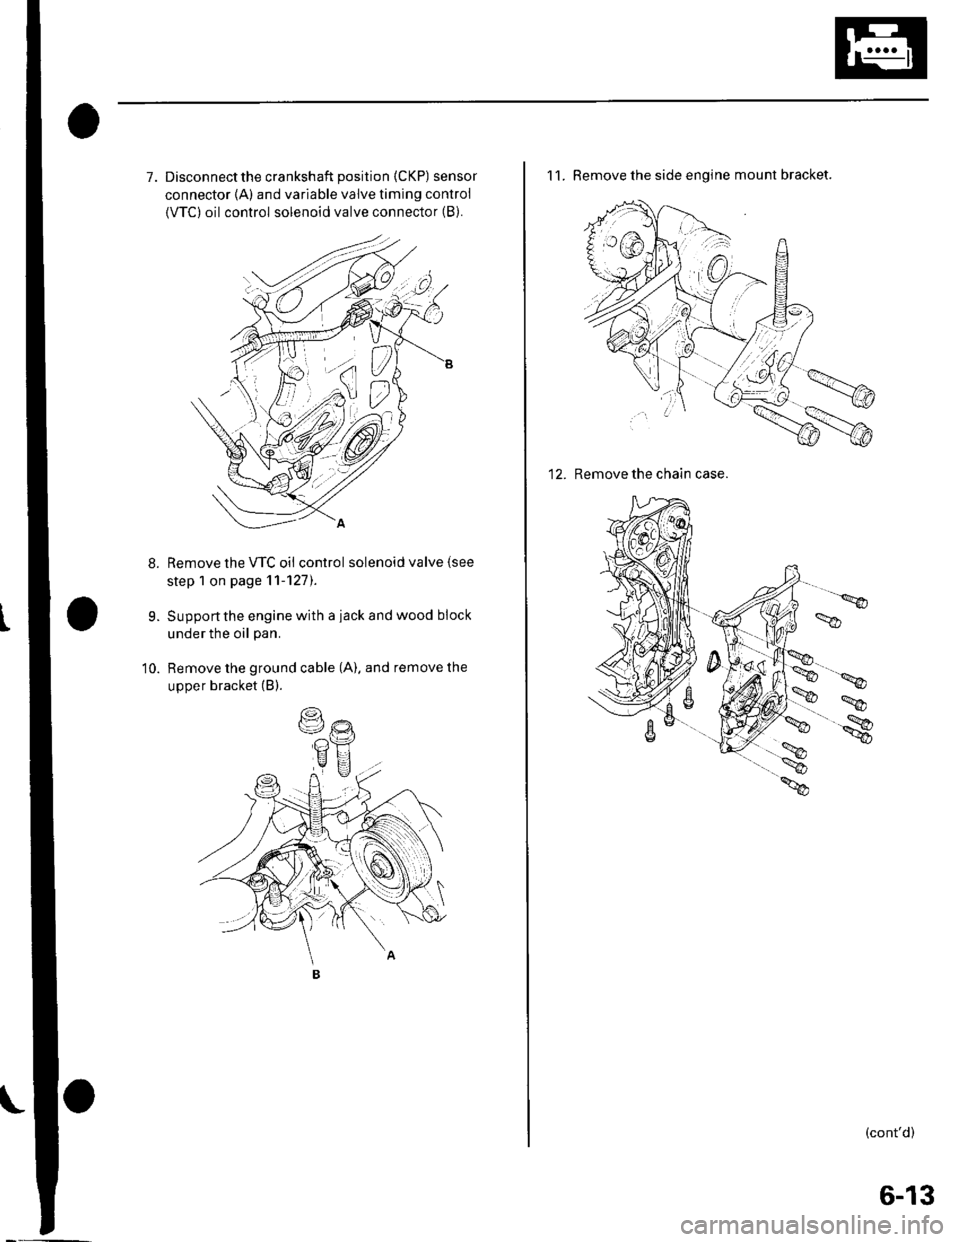 HONDA CIVIC 2003 7.G Owners Manual 7. Disconnectthe crankshaft position (CKP) sensor
connector {A) and variable valve timing control
{VTC) oil control solenoid valve connector (B).
Remove the VTC oil control solenoid valve (see
step 1 